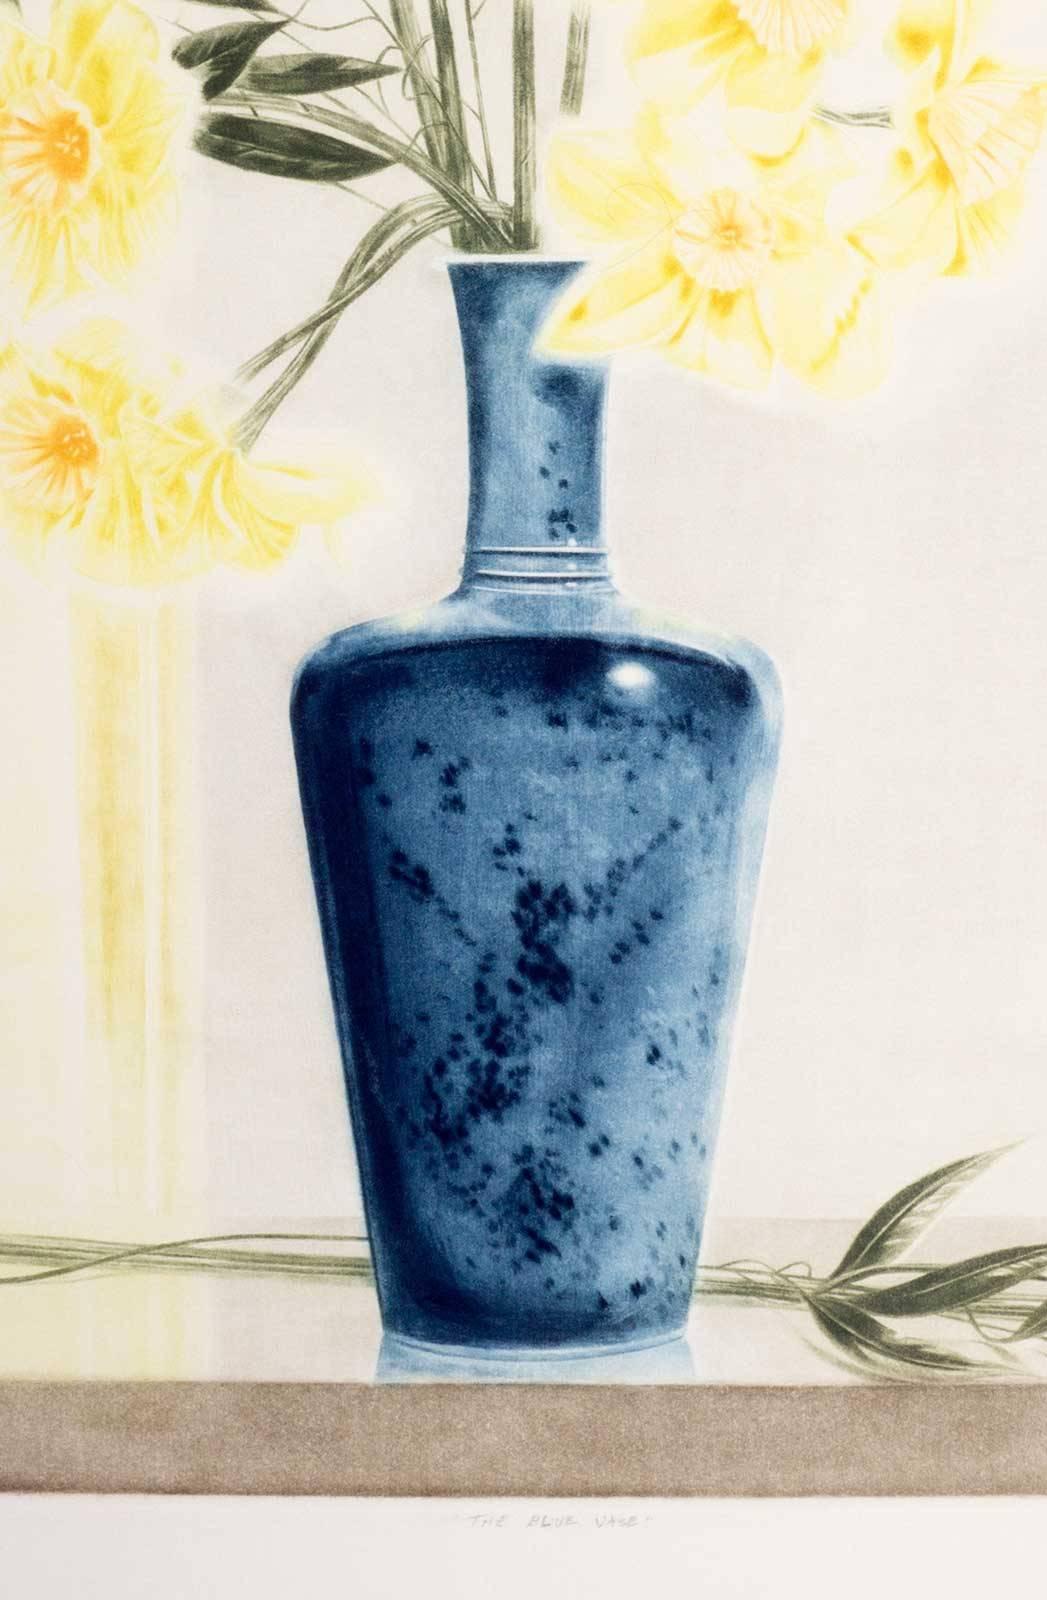 The Blue Vase (Large bouquet of yellow flowers in a high glaze blue vase) - Contemporary Print by Craig McPherson